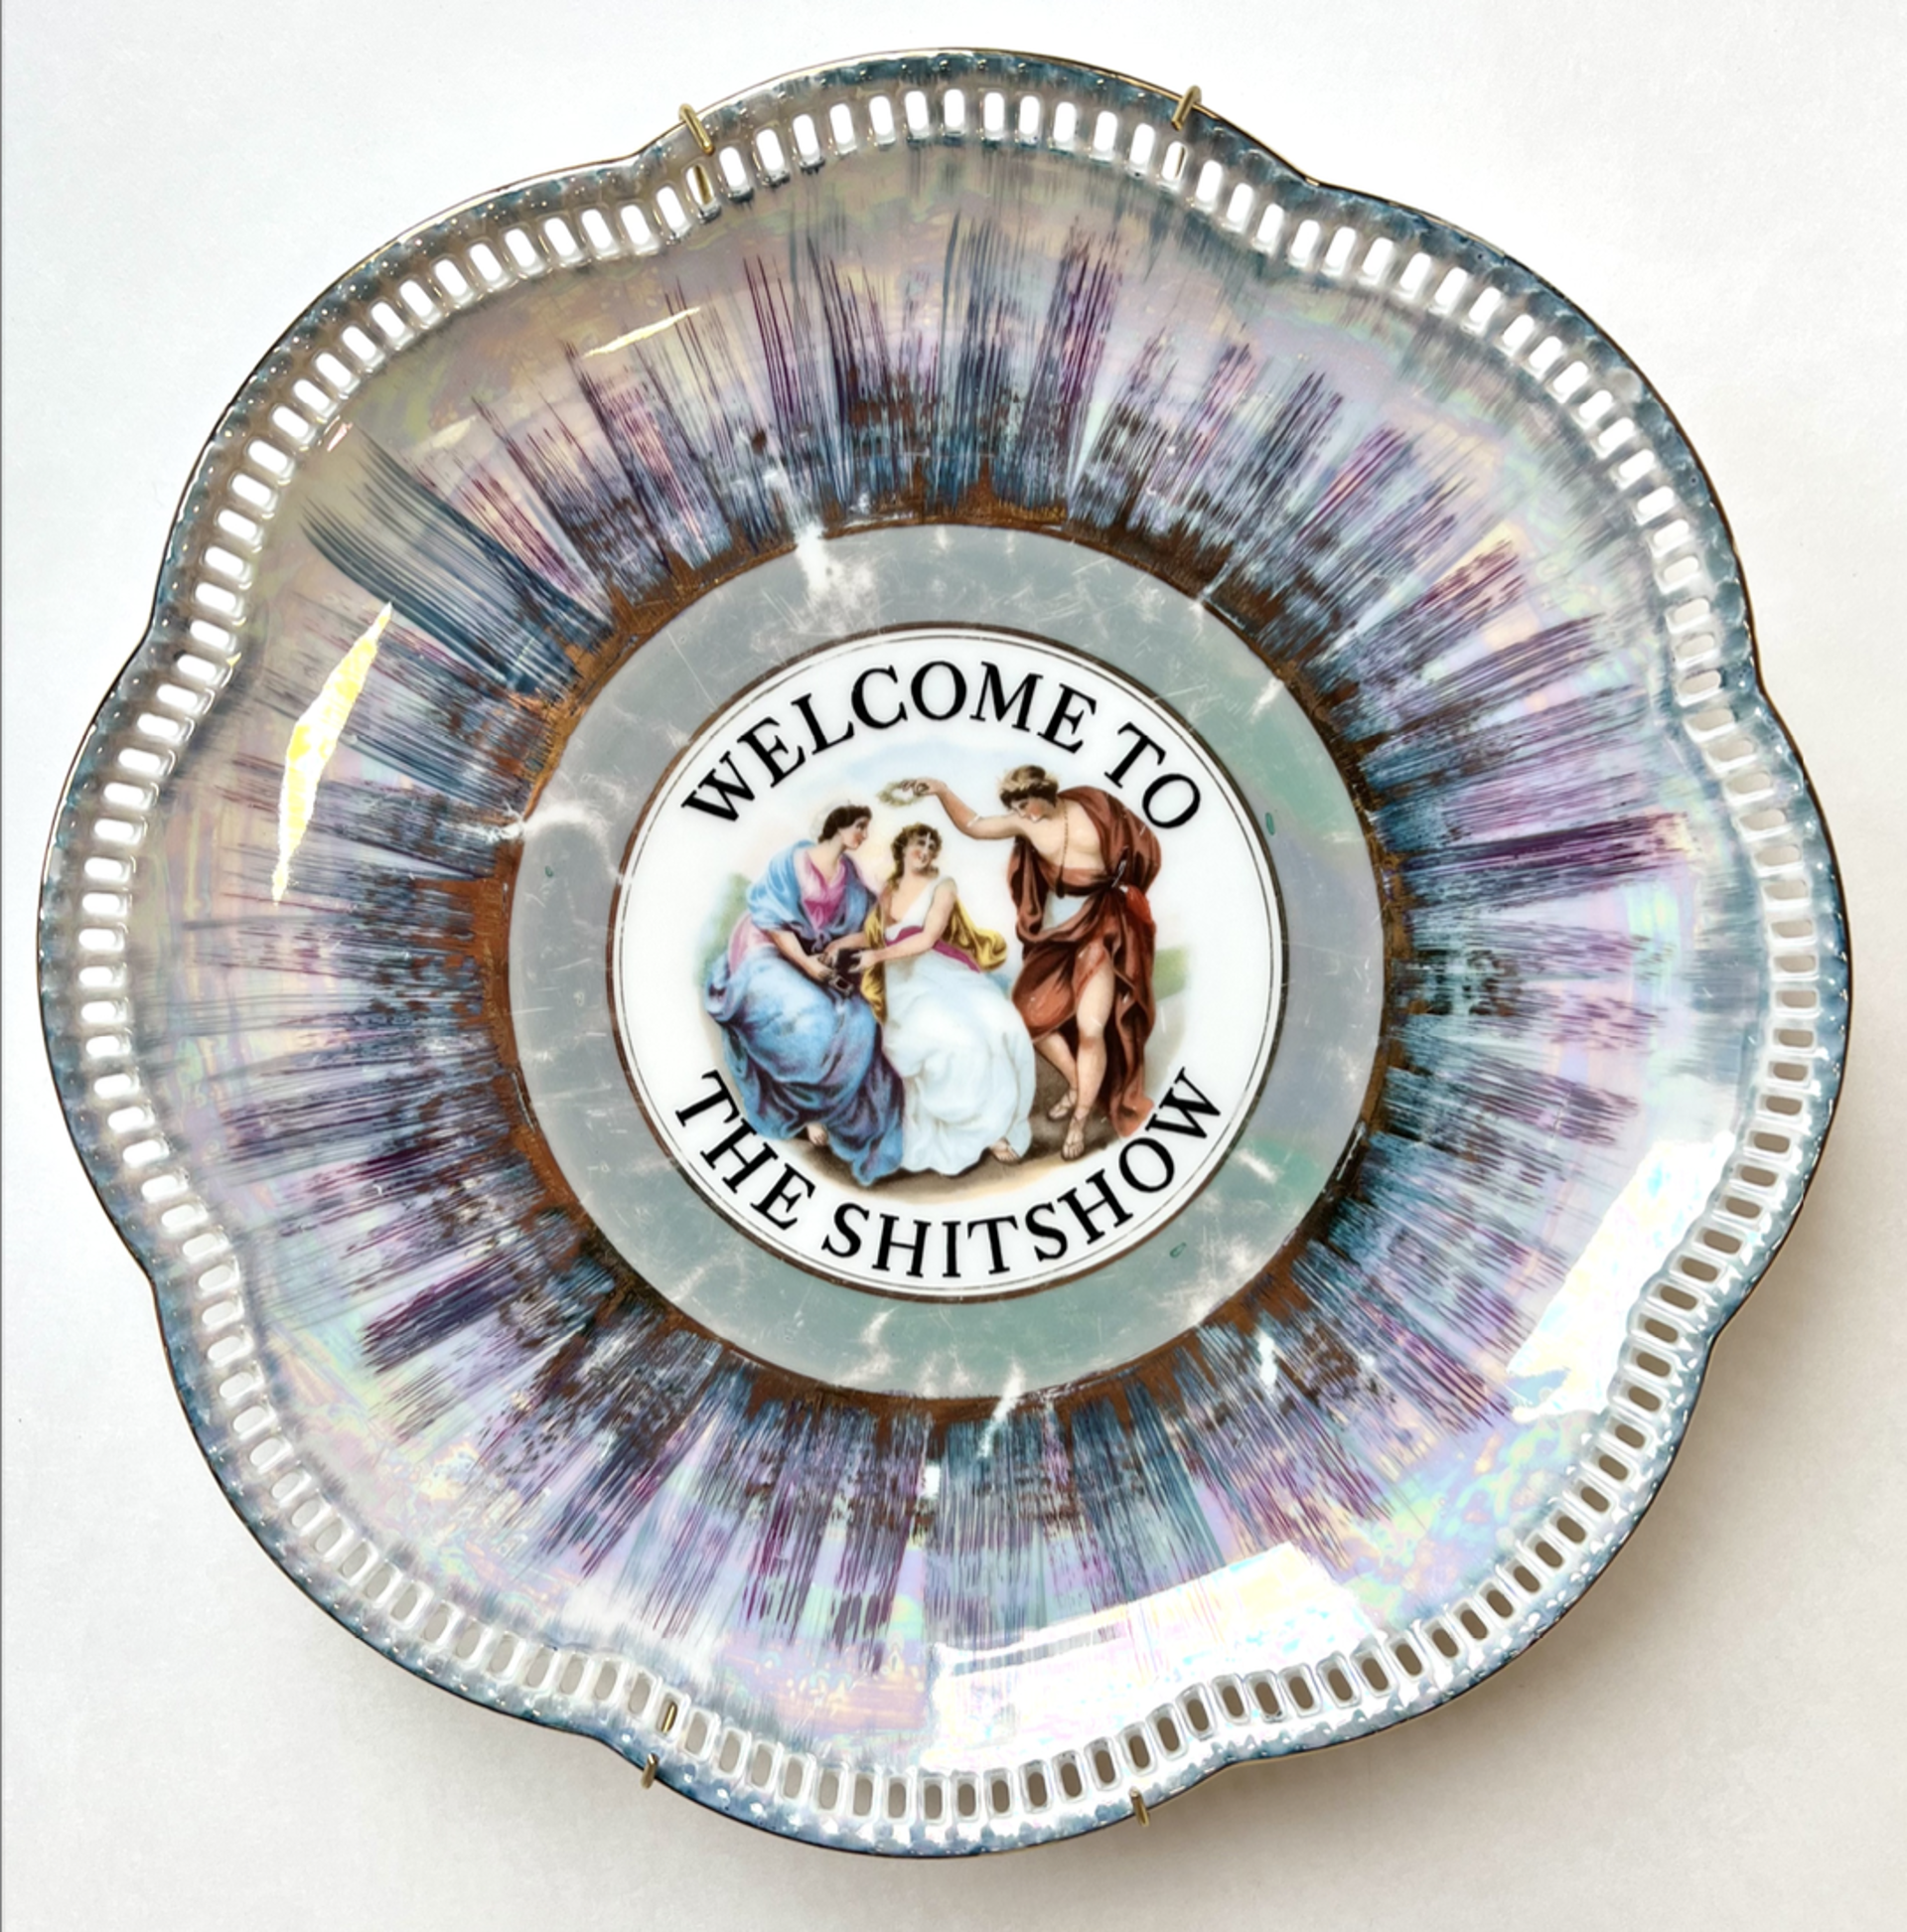 Welcome to the Shitshow (Dinner plate) by Marie-Claude Marquis